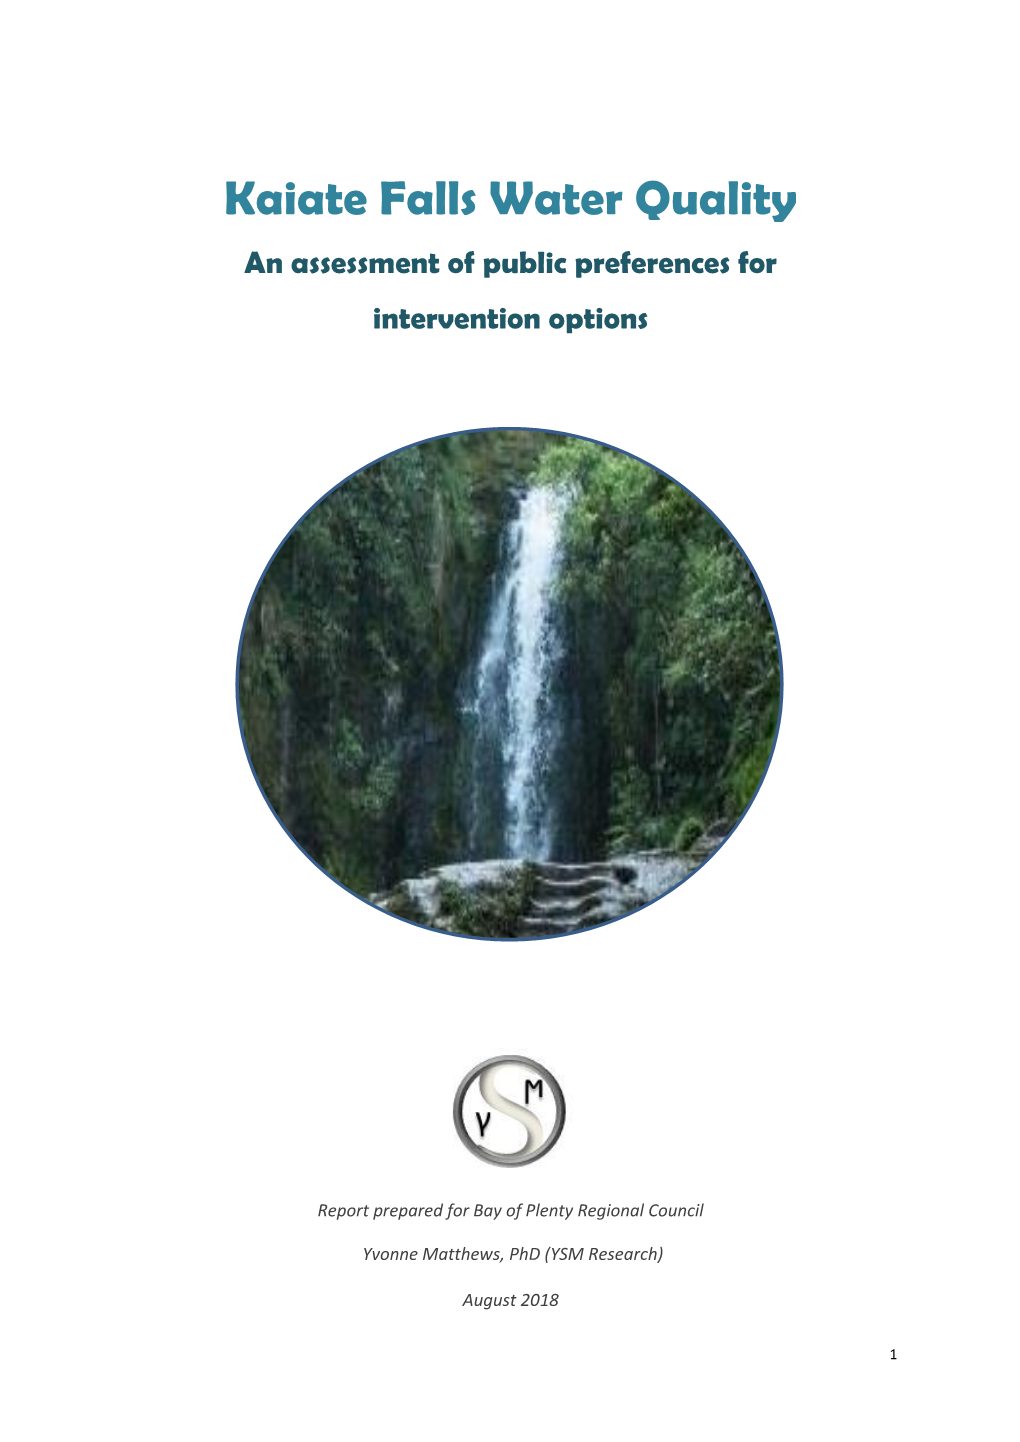 Kaiate Falls Water Quality an Assessment of Public Preferences for Intervention Options